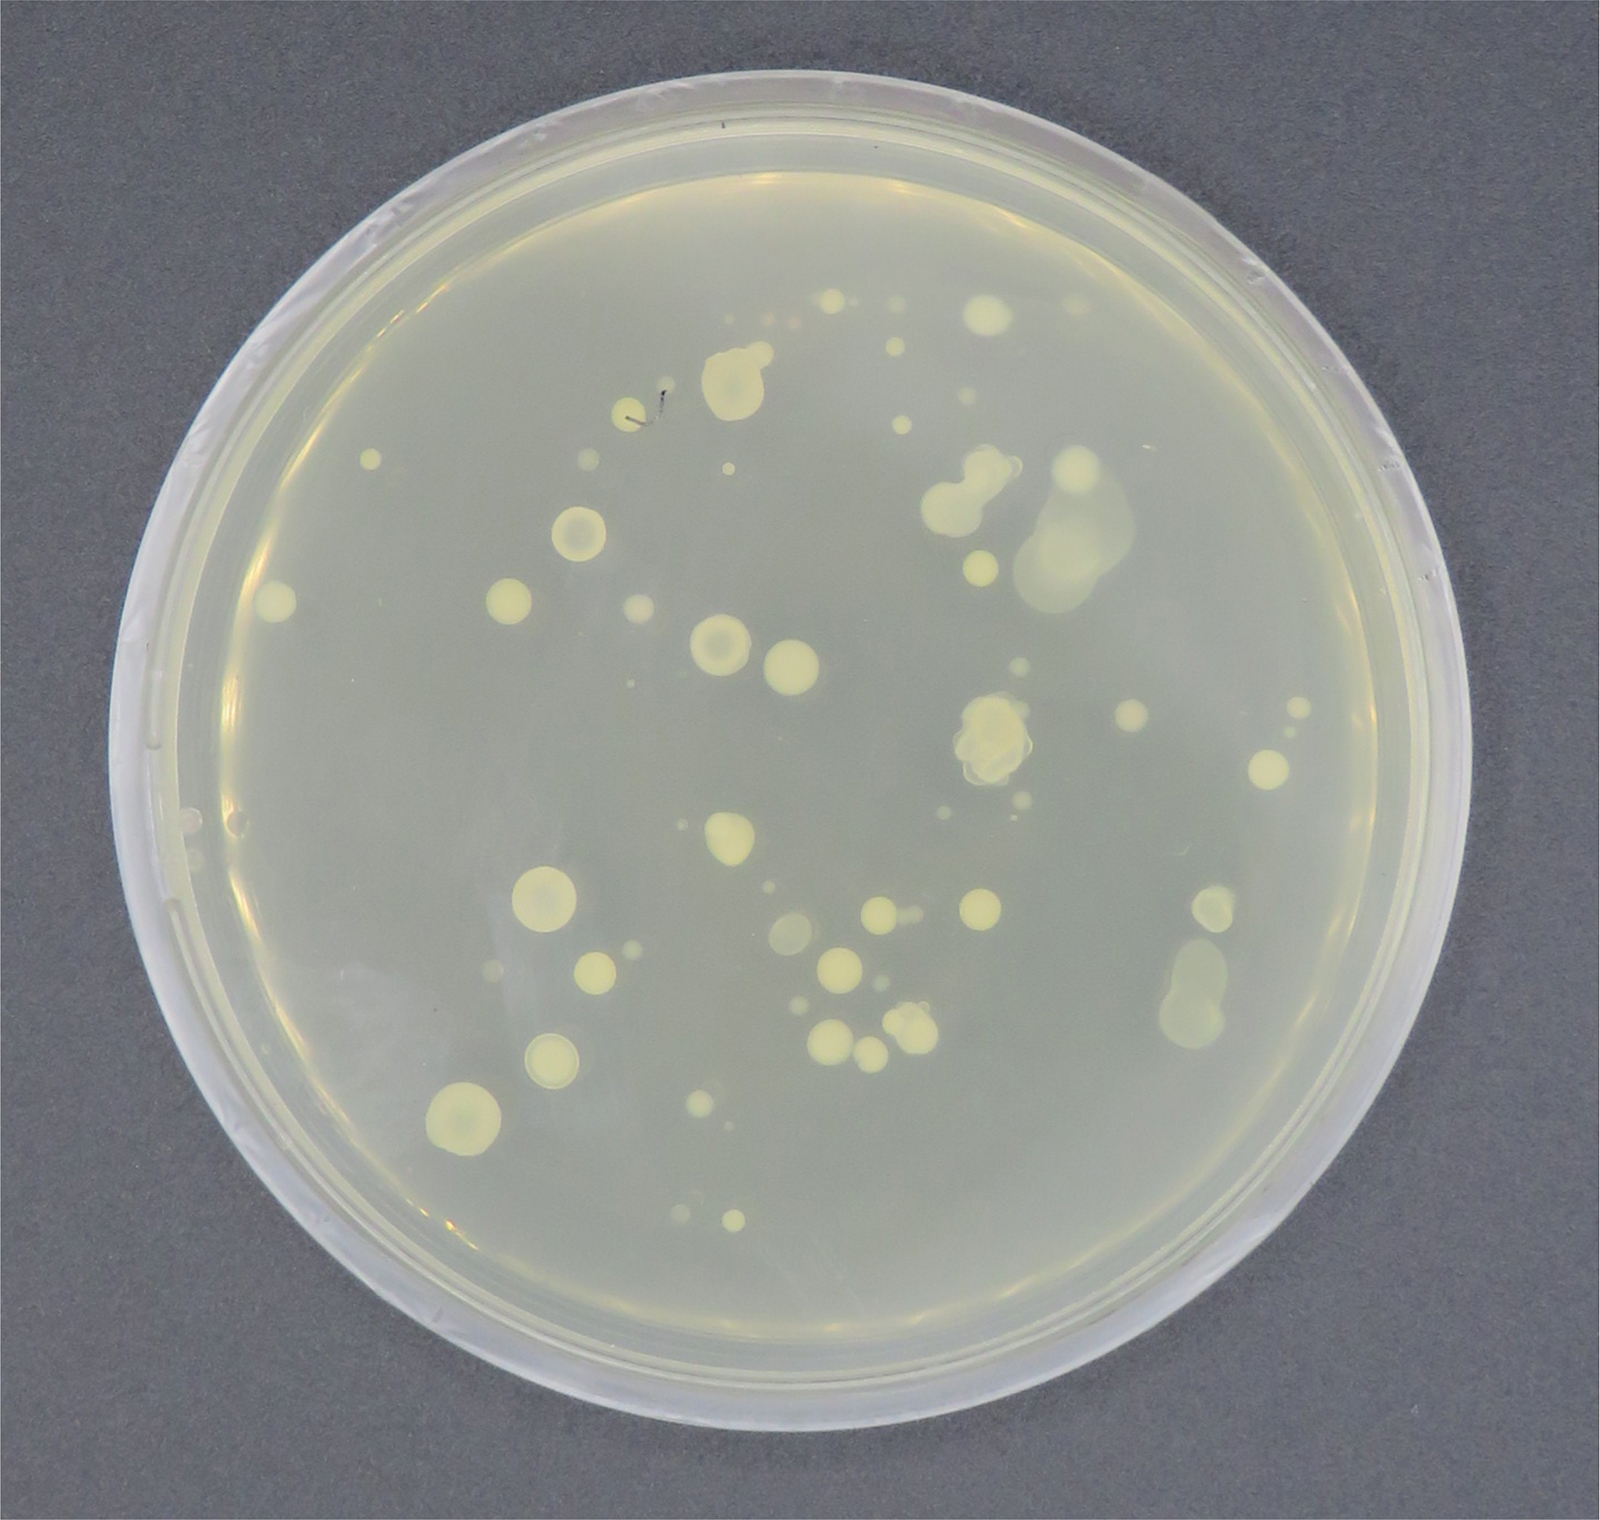 The bacterial culture is plated out in a nutrient medium.